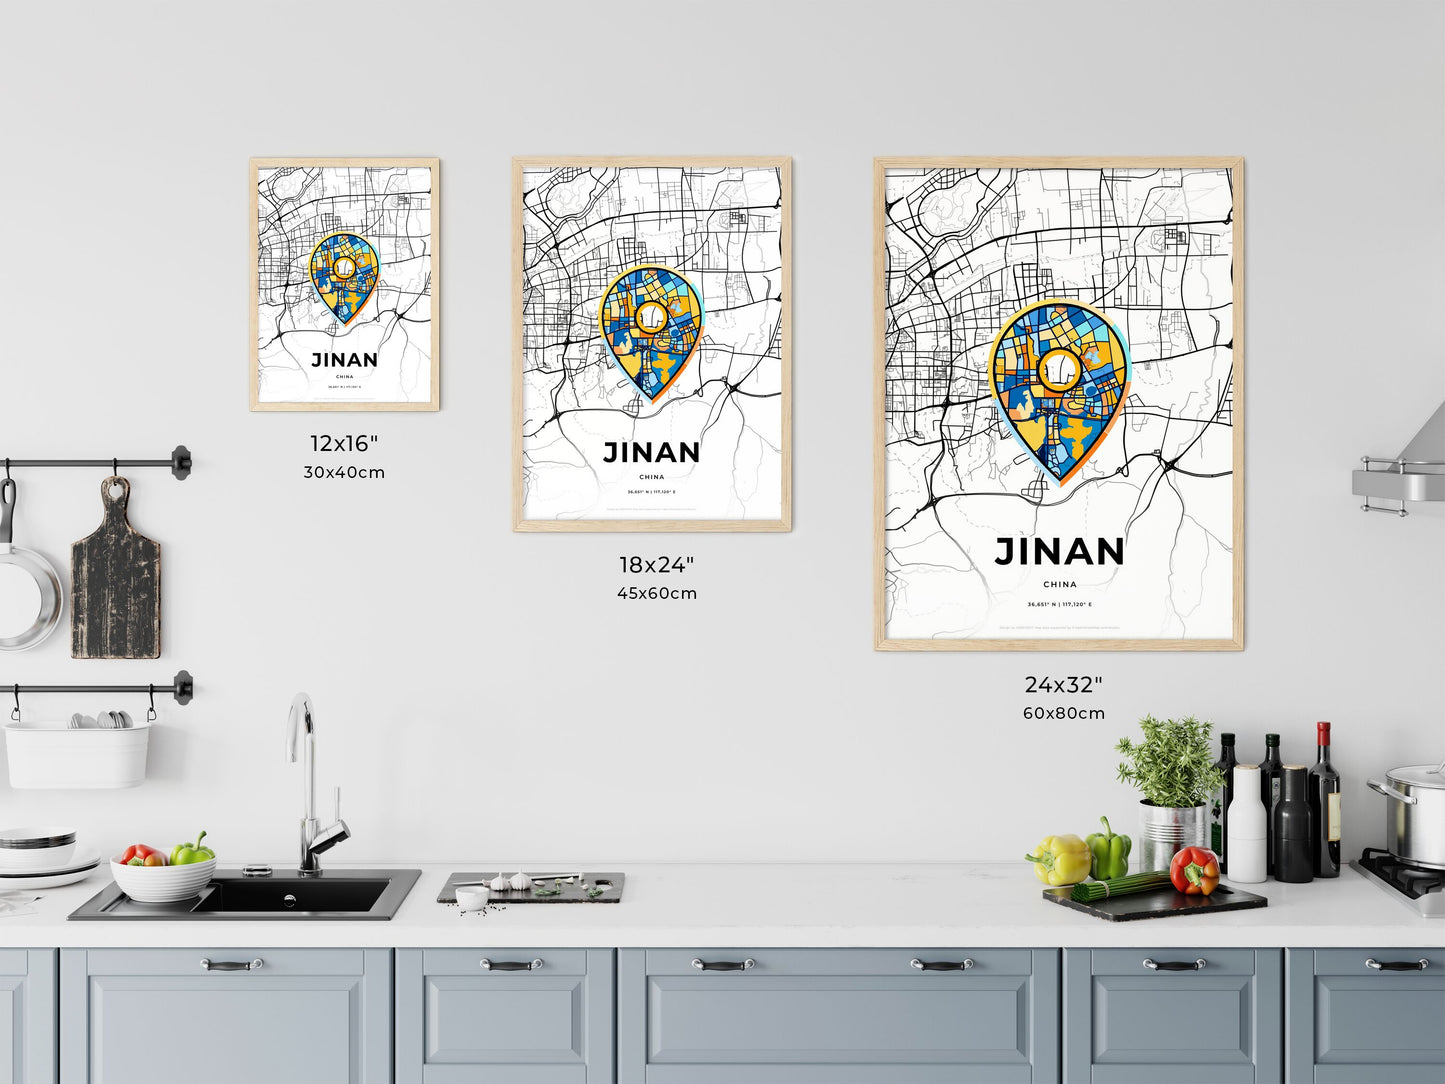 JINAN CHINA minimal art map with a colorful icon. Where it all began, Couple map gift.